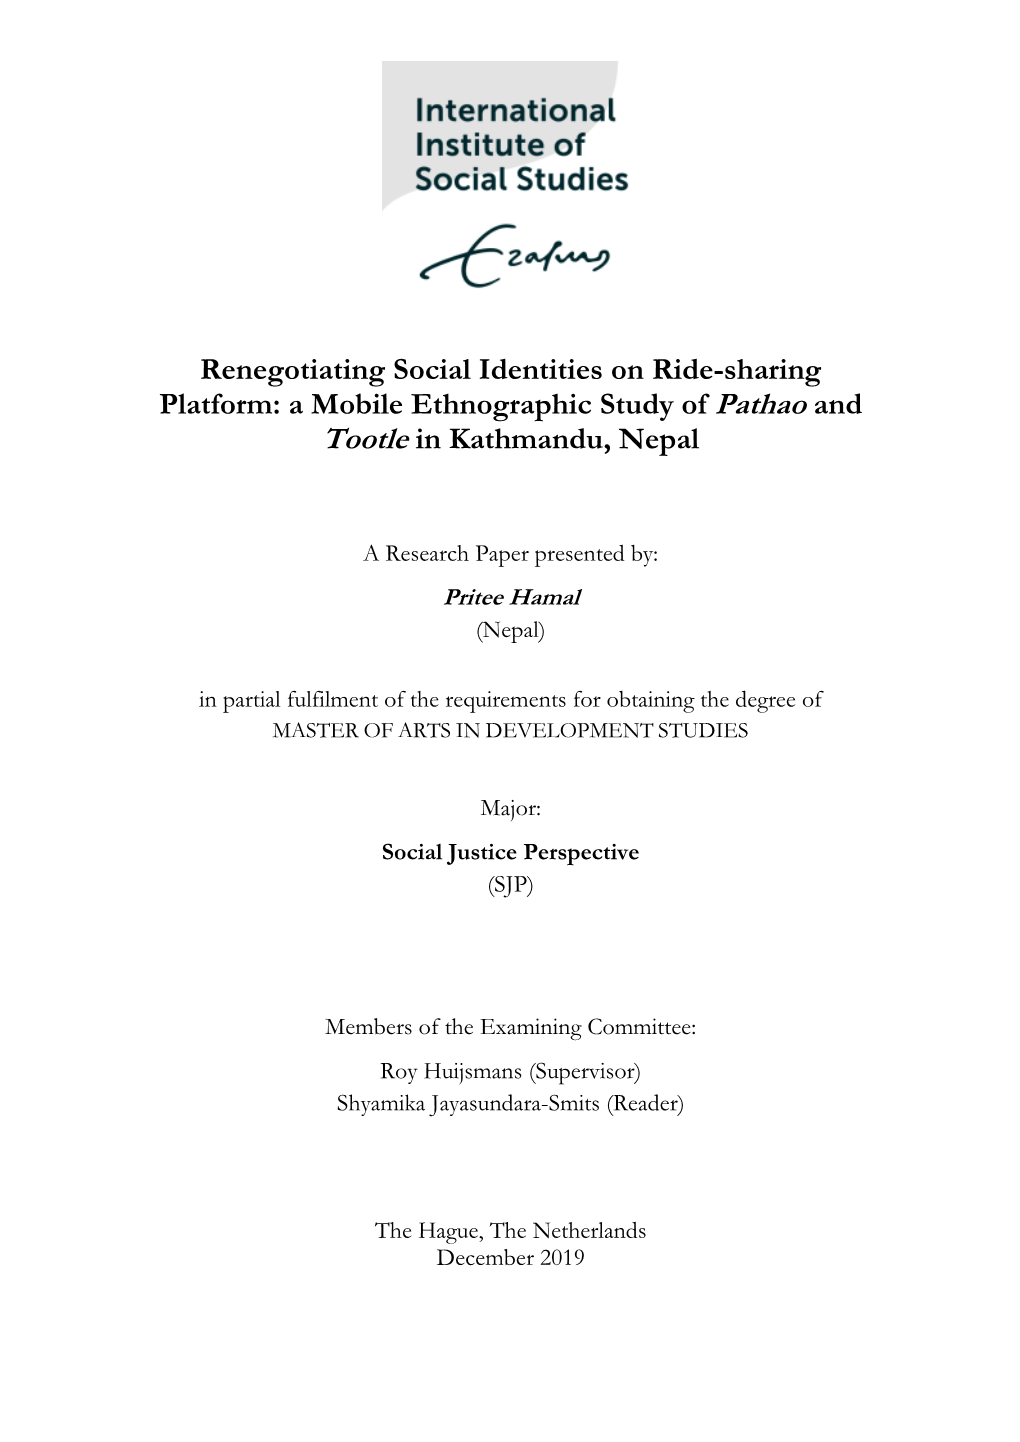 A Mobile Ethnographic Study of Pathao and Tootle in Kathmandu, Nepal